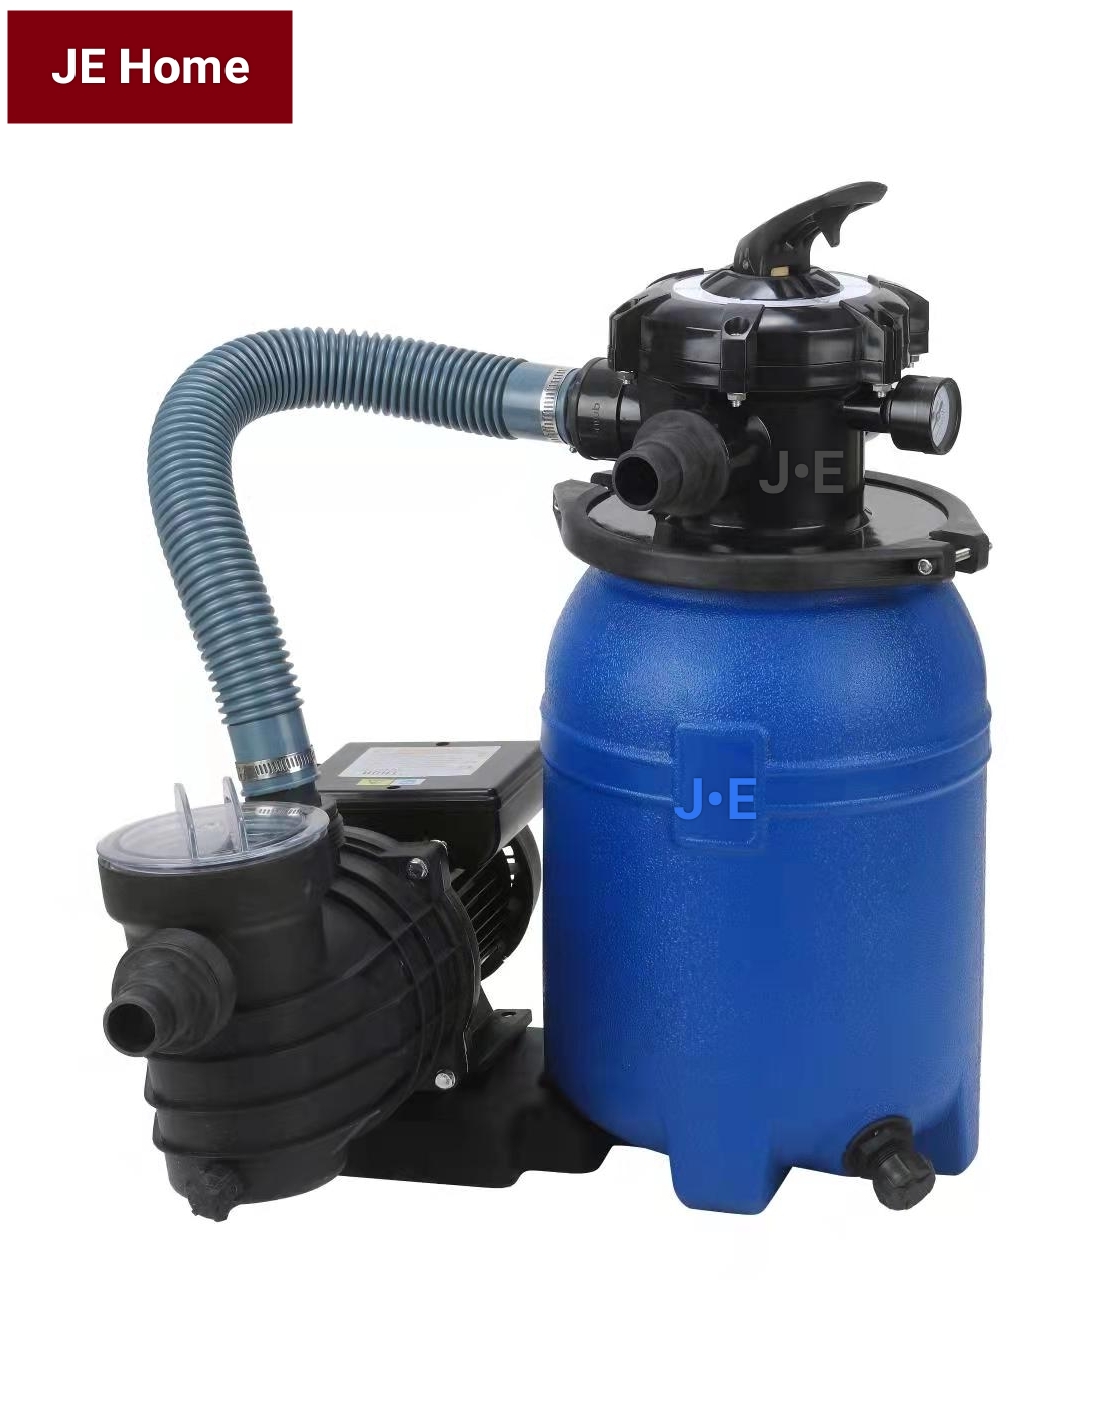 XtremepowerUS 75132 Above Ground 3/4 HP Pools Sand Filter, 48% OFF